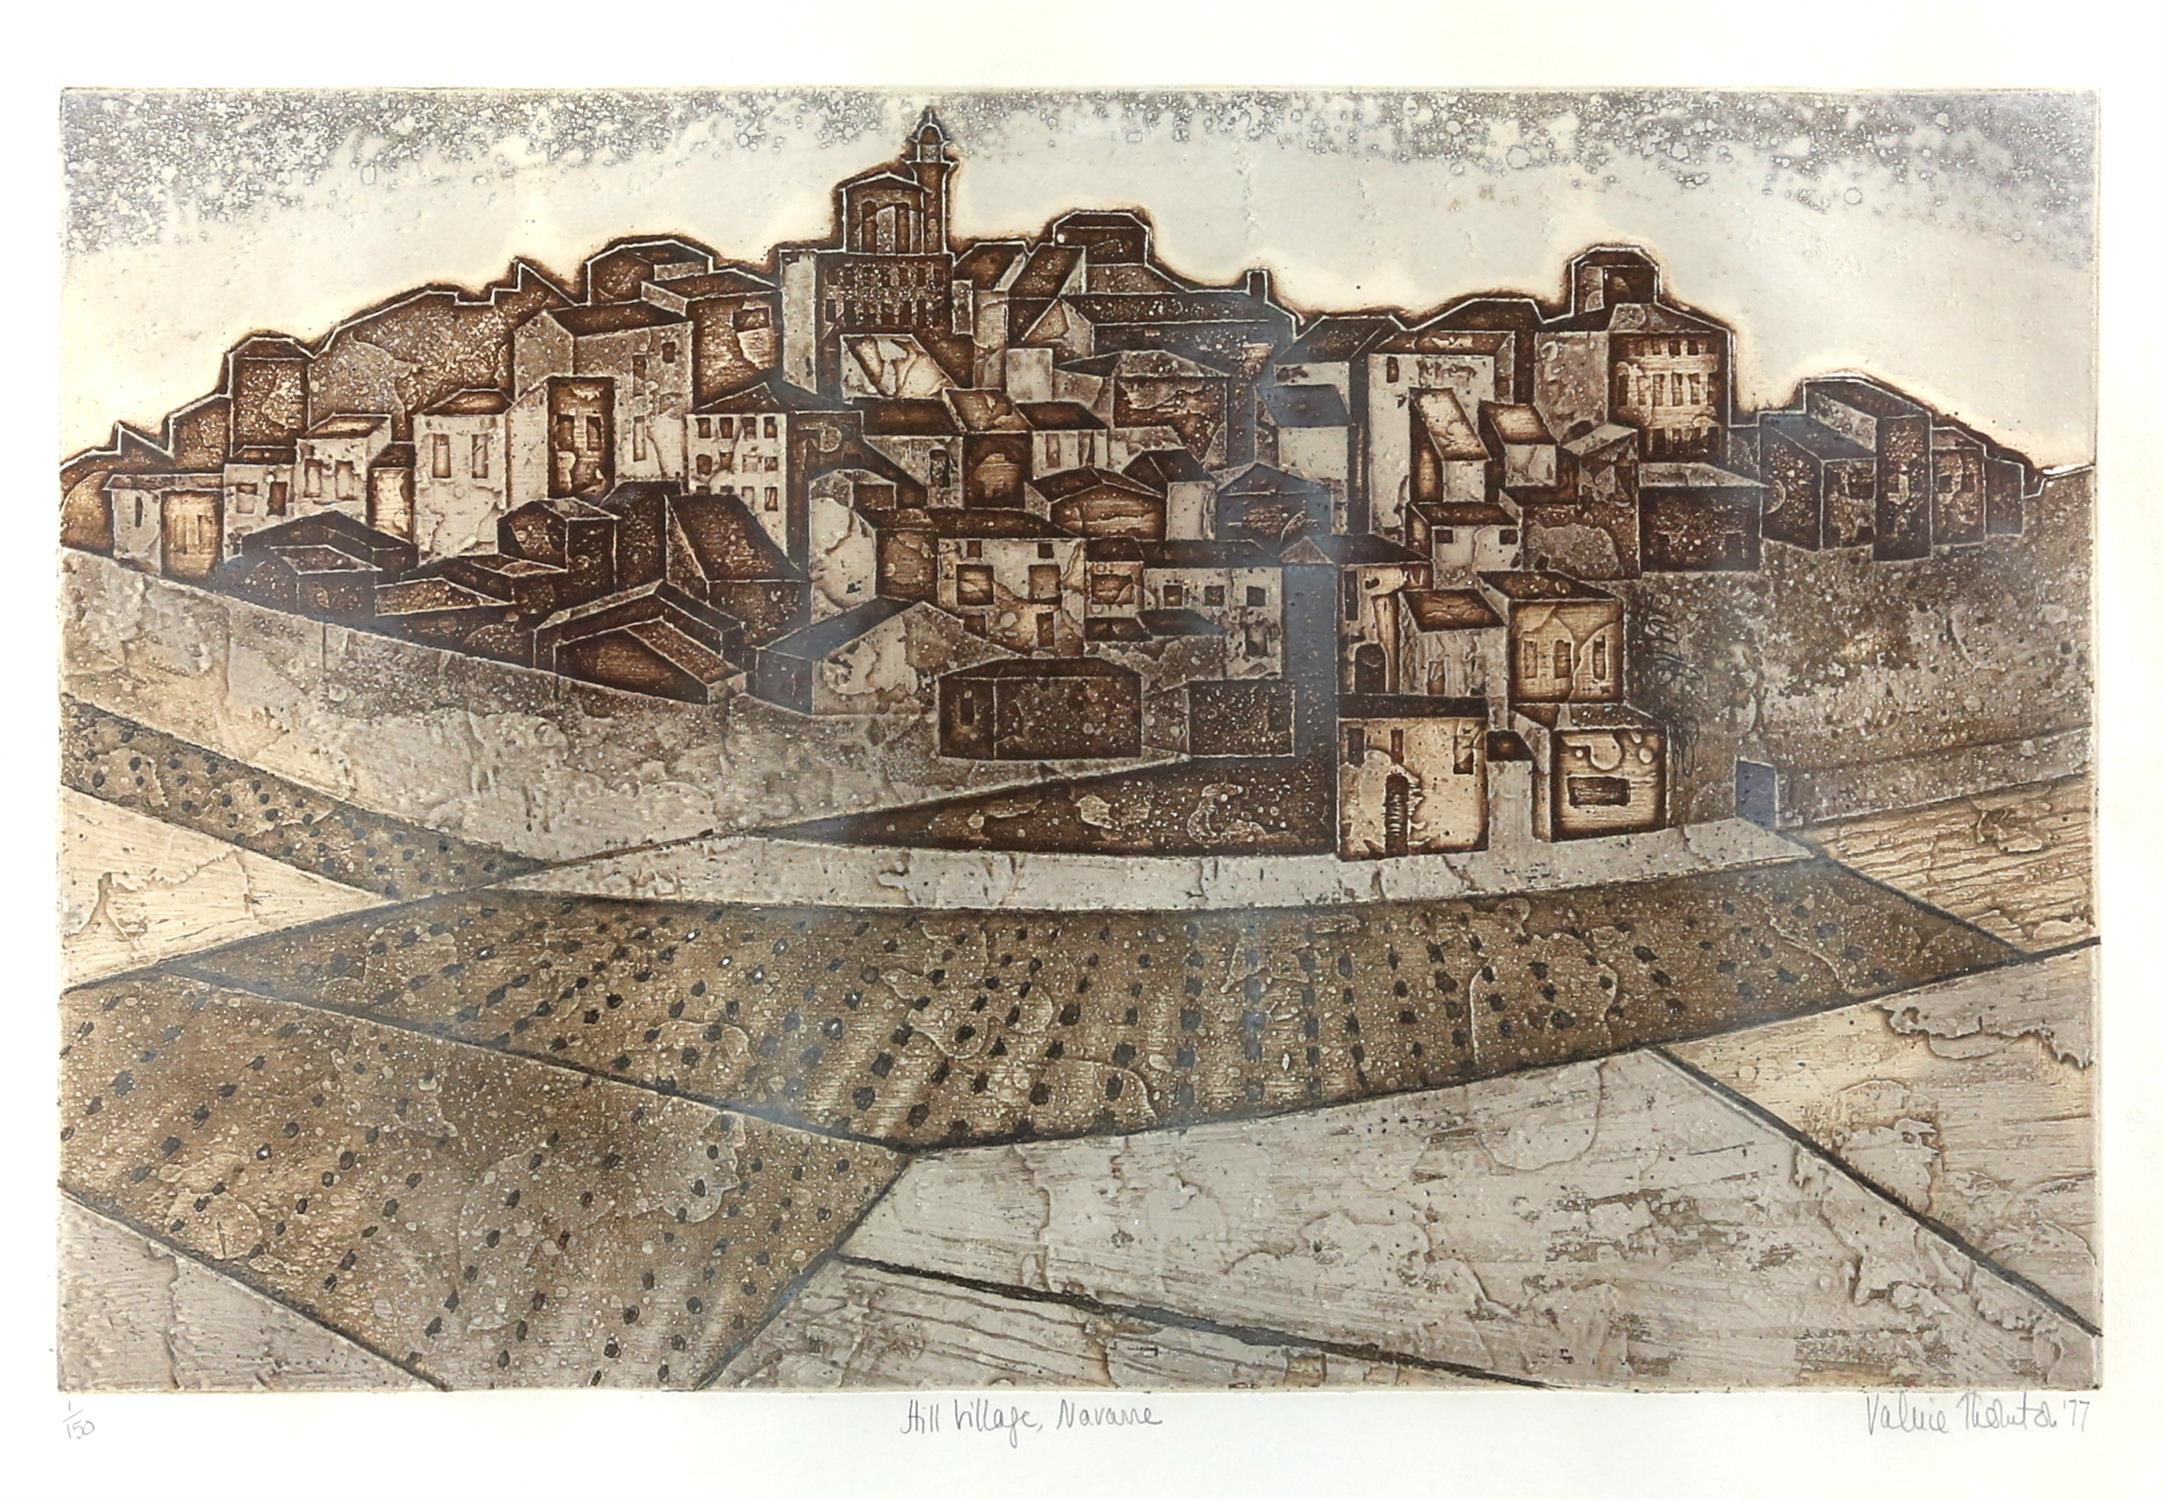 Valerie Thornton (British, 1931-1991). 'Hill Village, Navame'. Limited-edition lithograph. Signed,